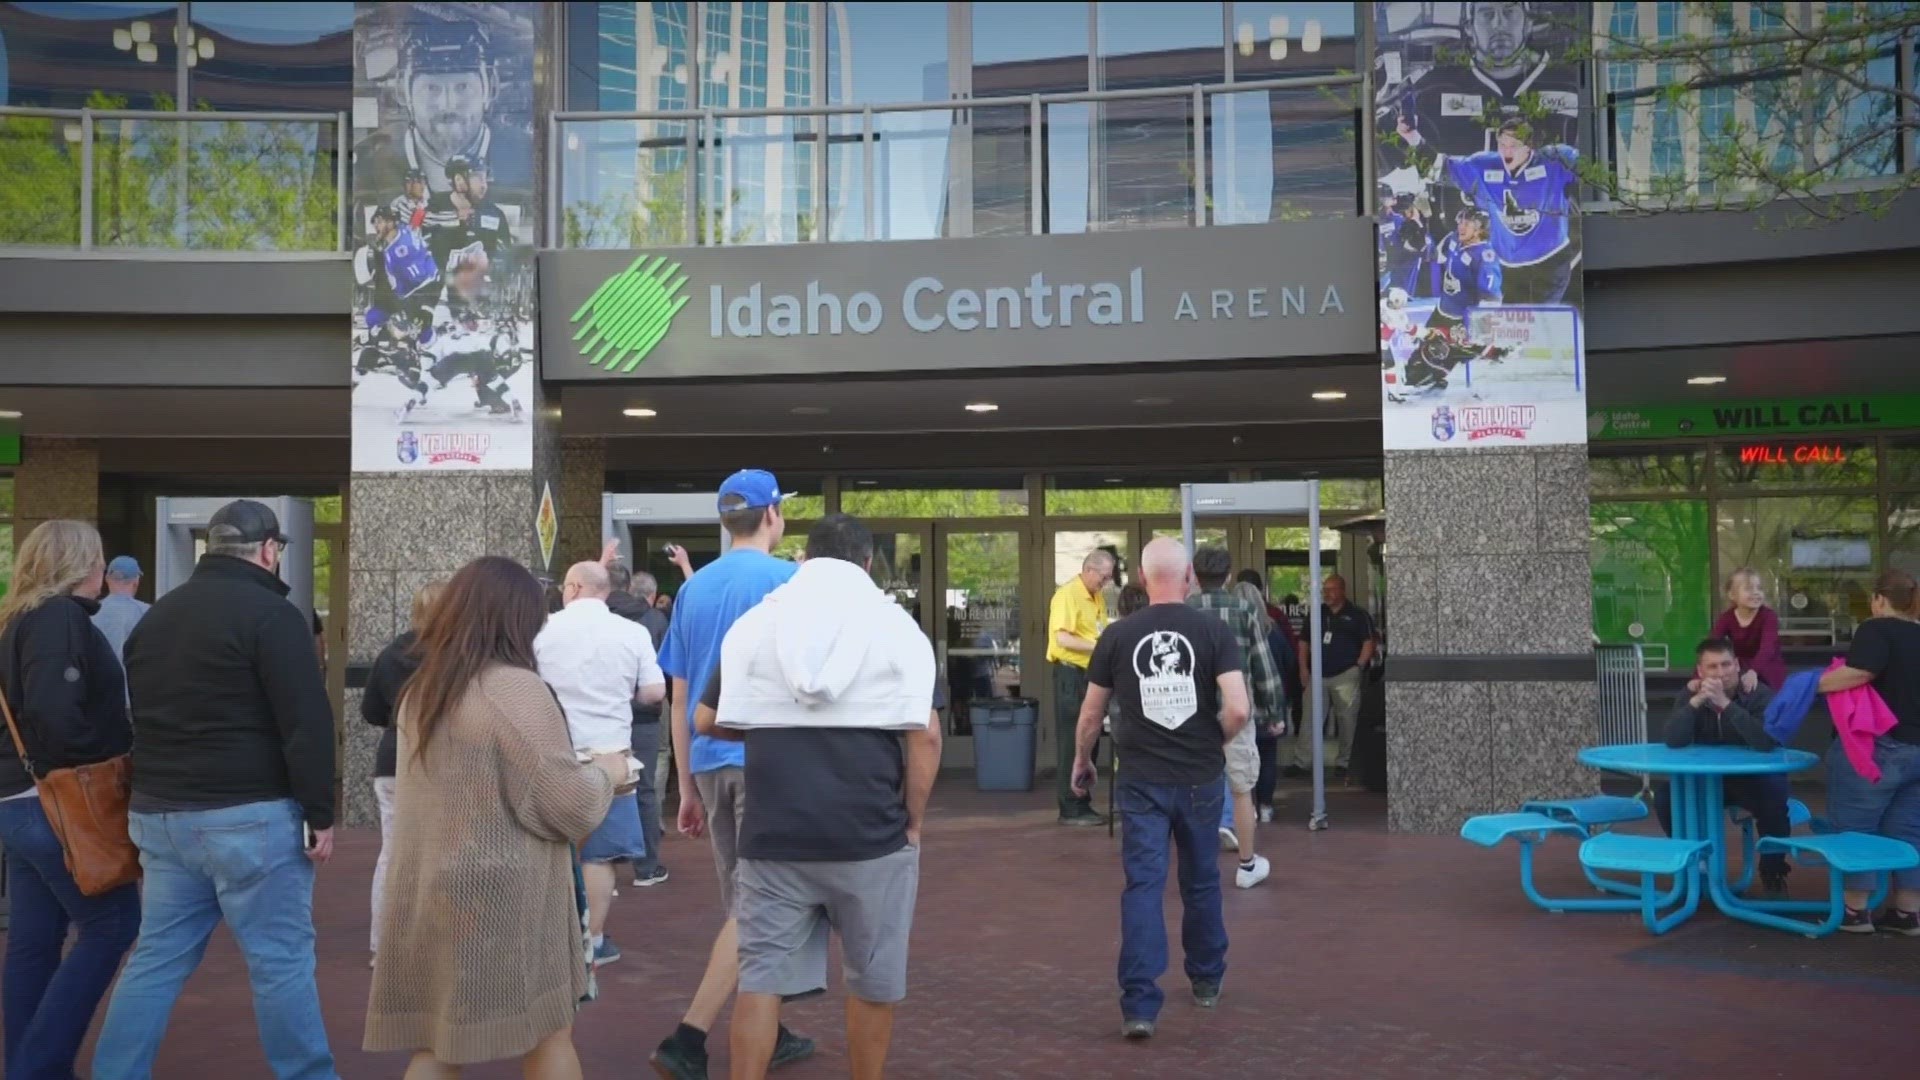 Idaho and Dallas agreed to a two-year affiliation extension on Thursday. The franchises have the third-longest partnership between ECHL and NHL clubs.